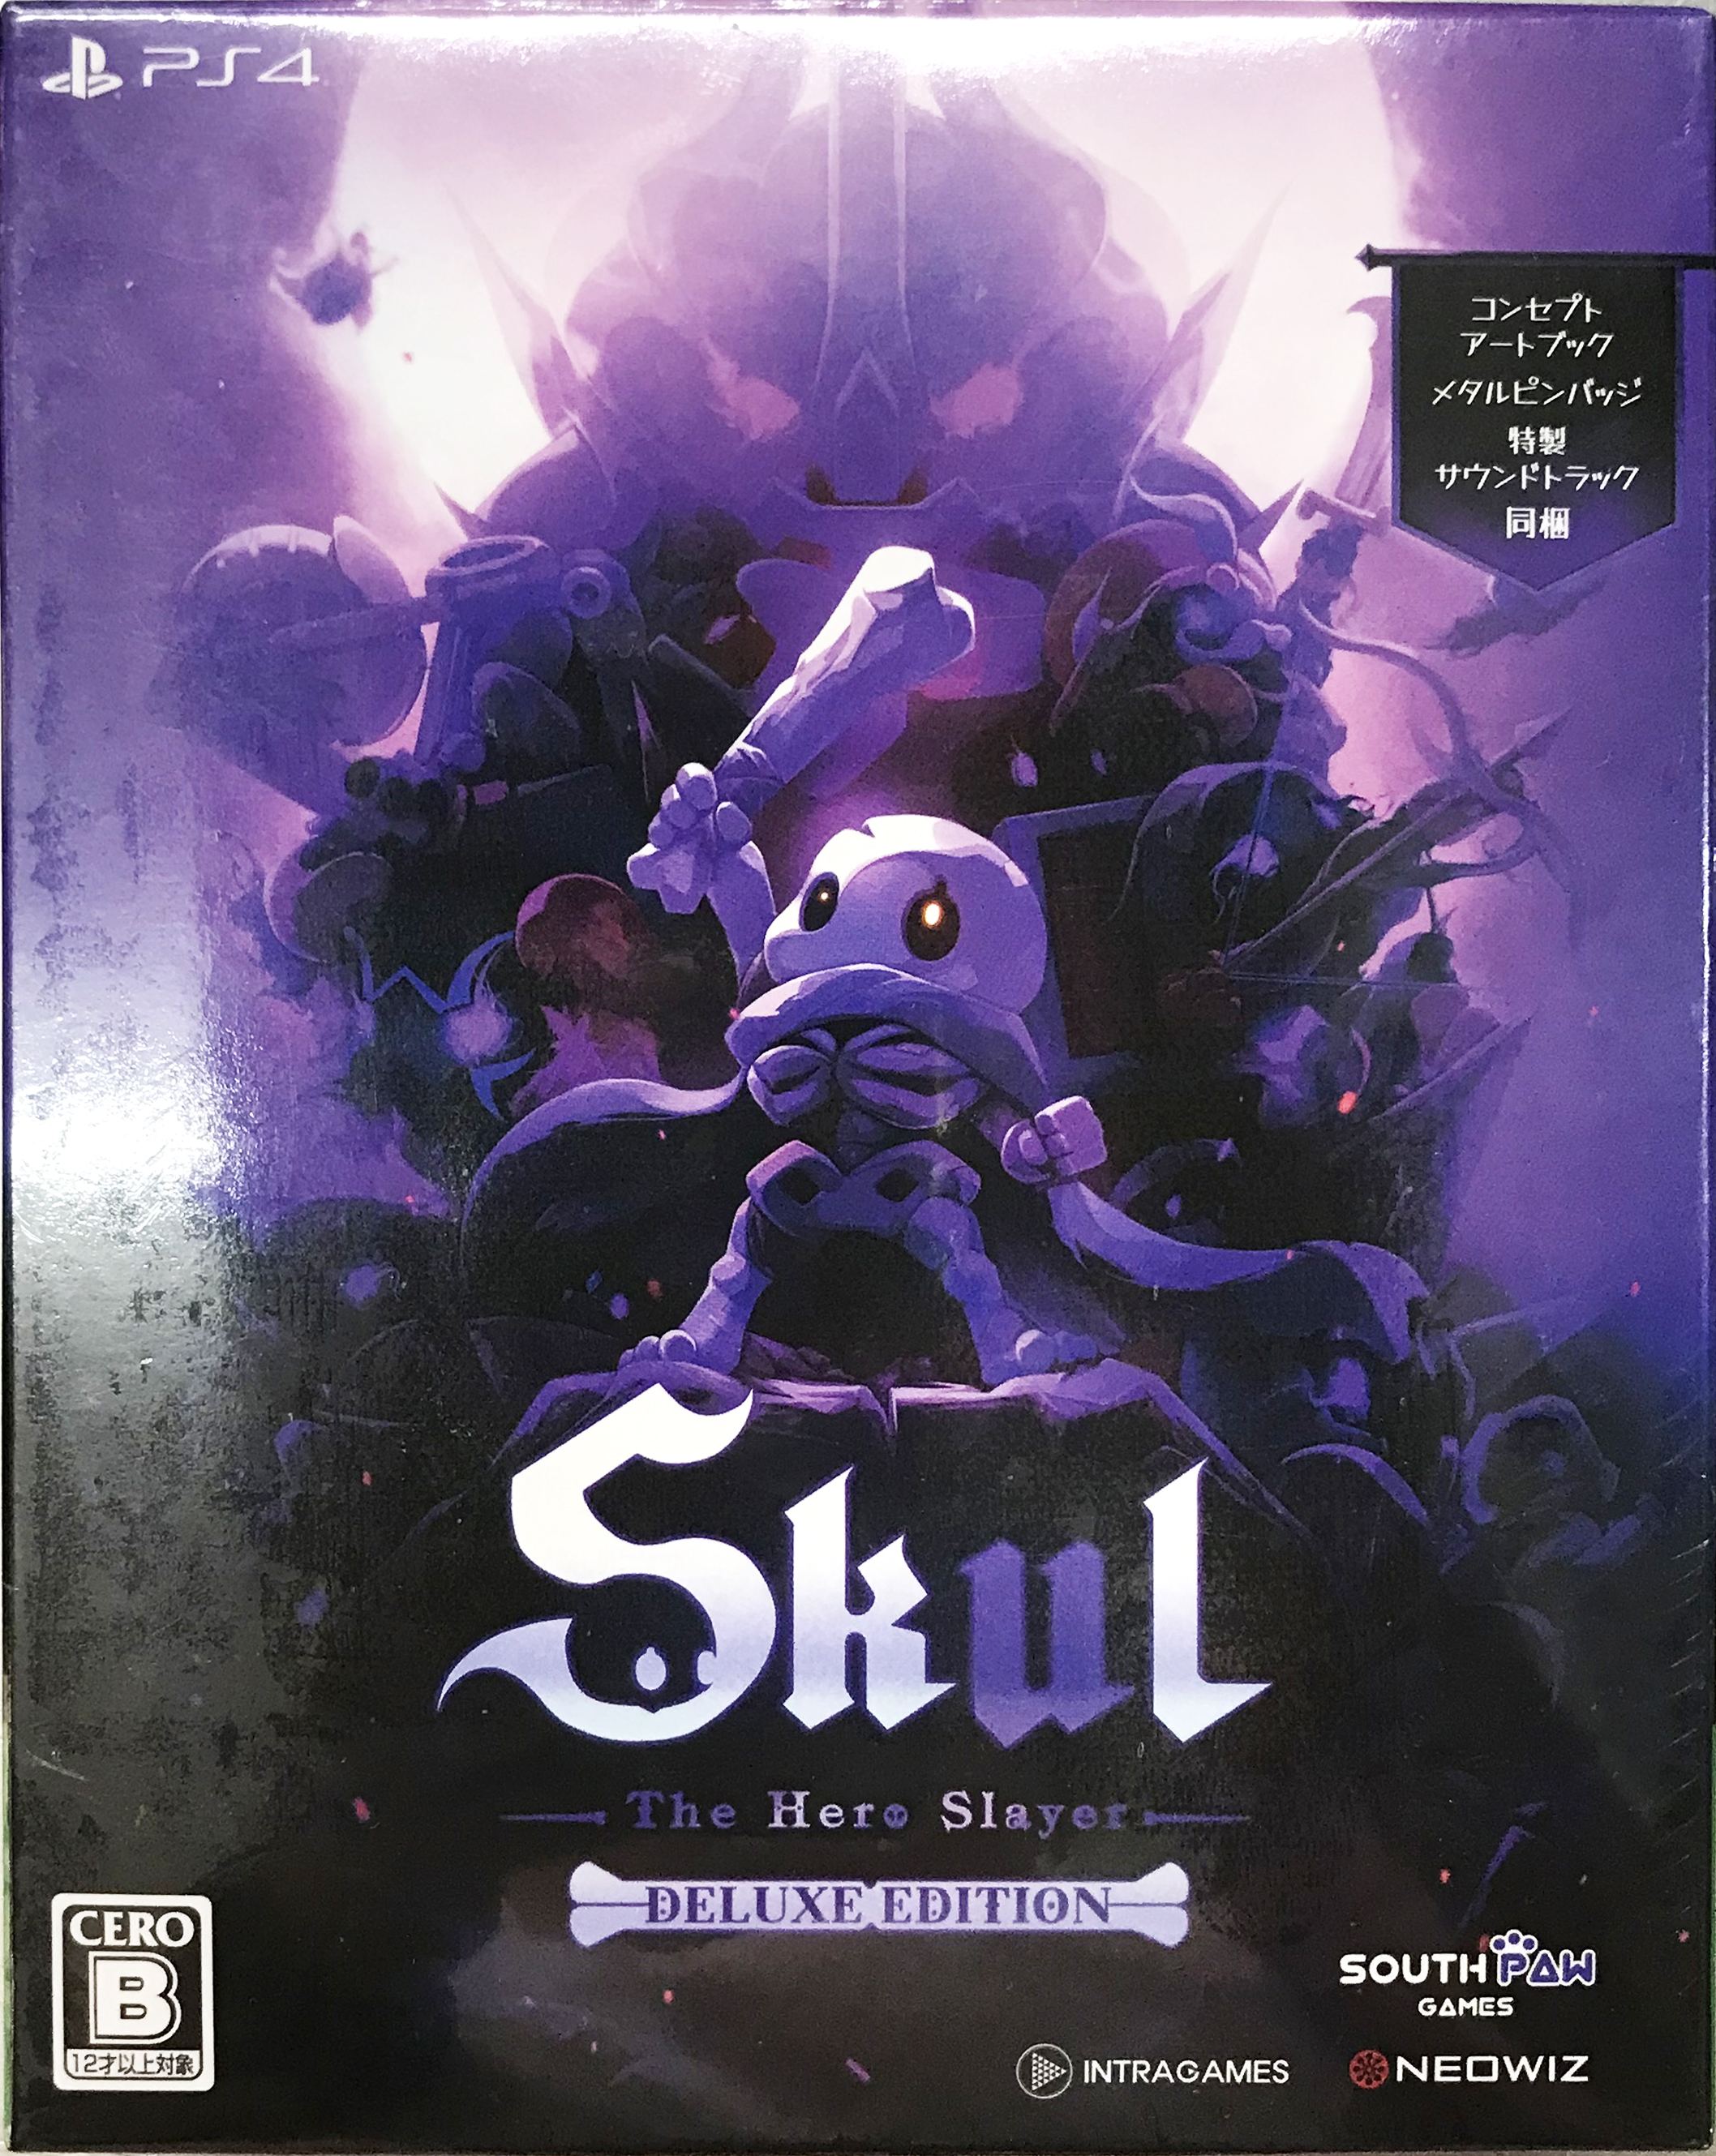 Skul: The Hero Slayer [Deluxe Edition] (English) for PlayStation 4